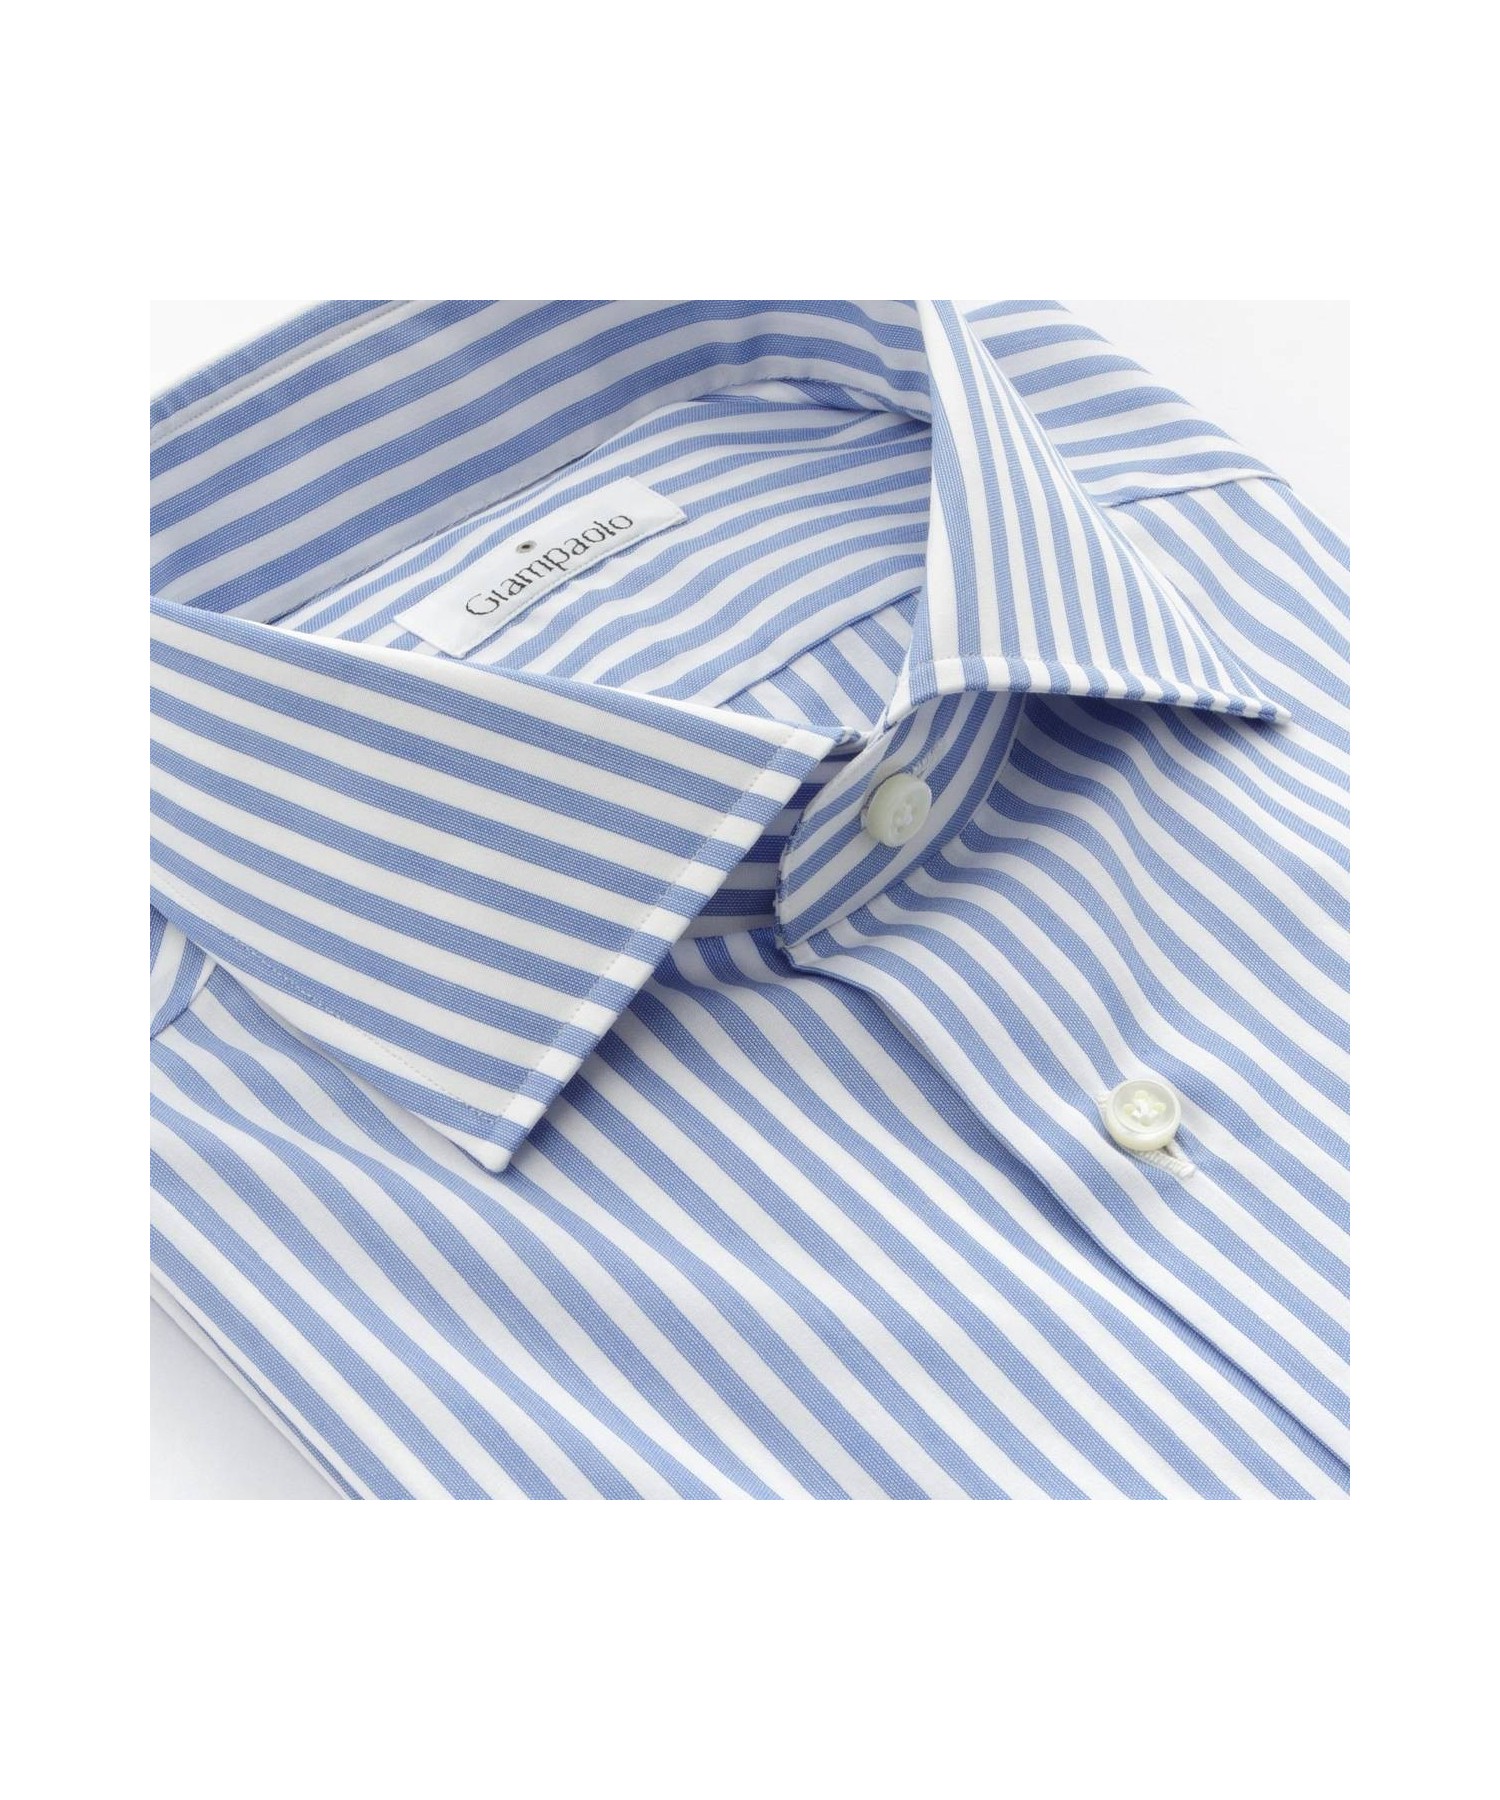 STRIPED POPLIN SHIRT - 8 PHASES MADE BY HAND